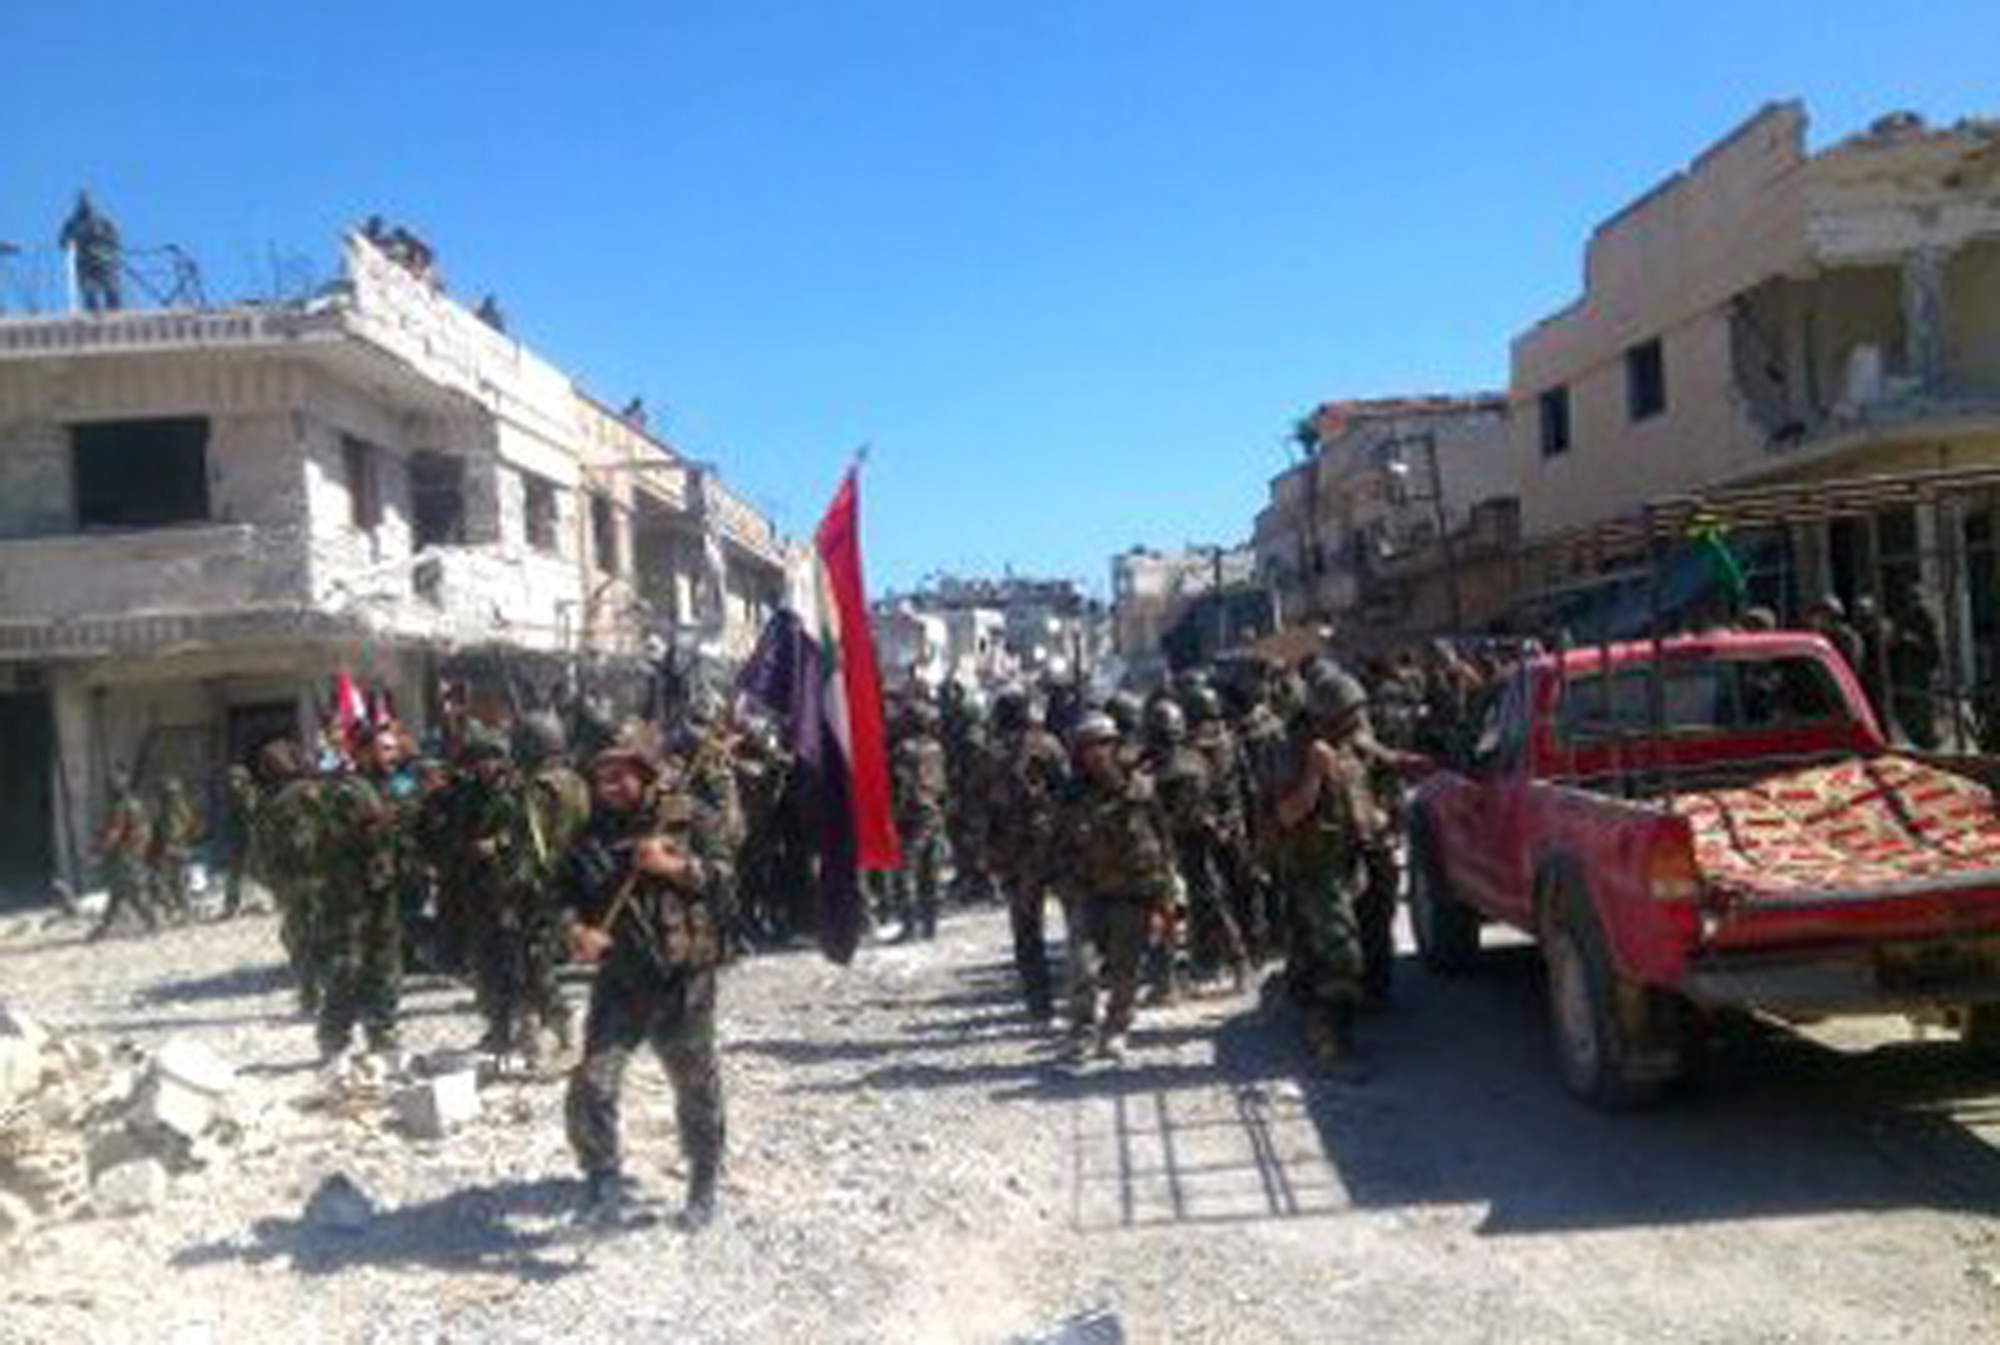 This photo released by the Syrian official news agency SANA shows Syrian army troops in the town of Qusair on Wednesday.